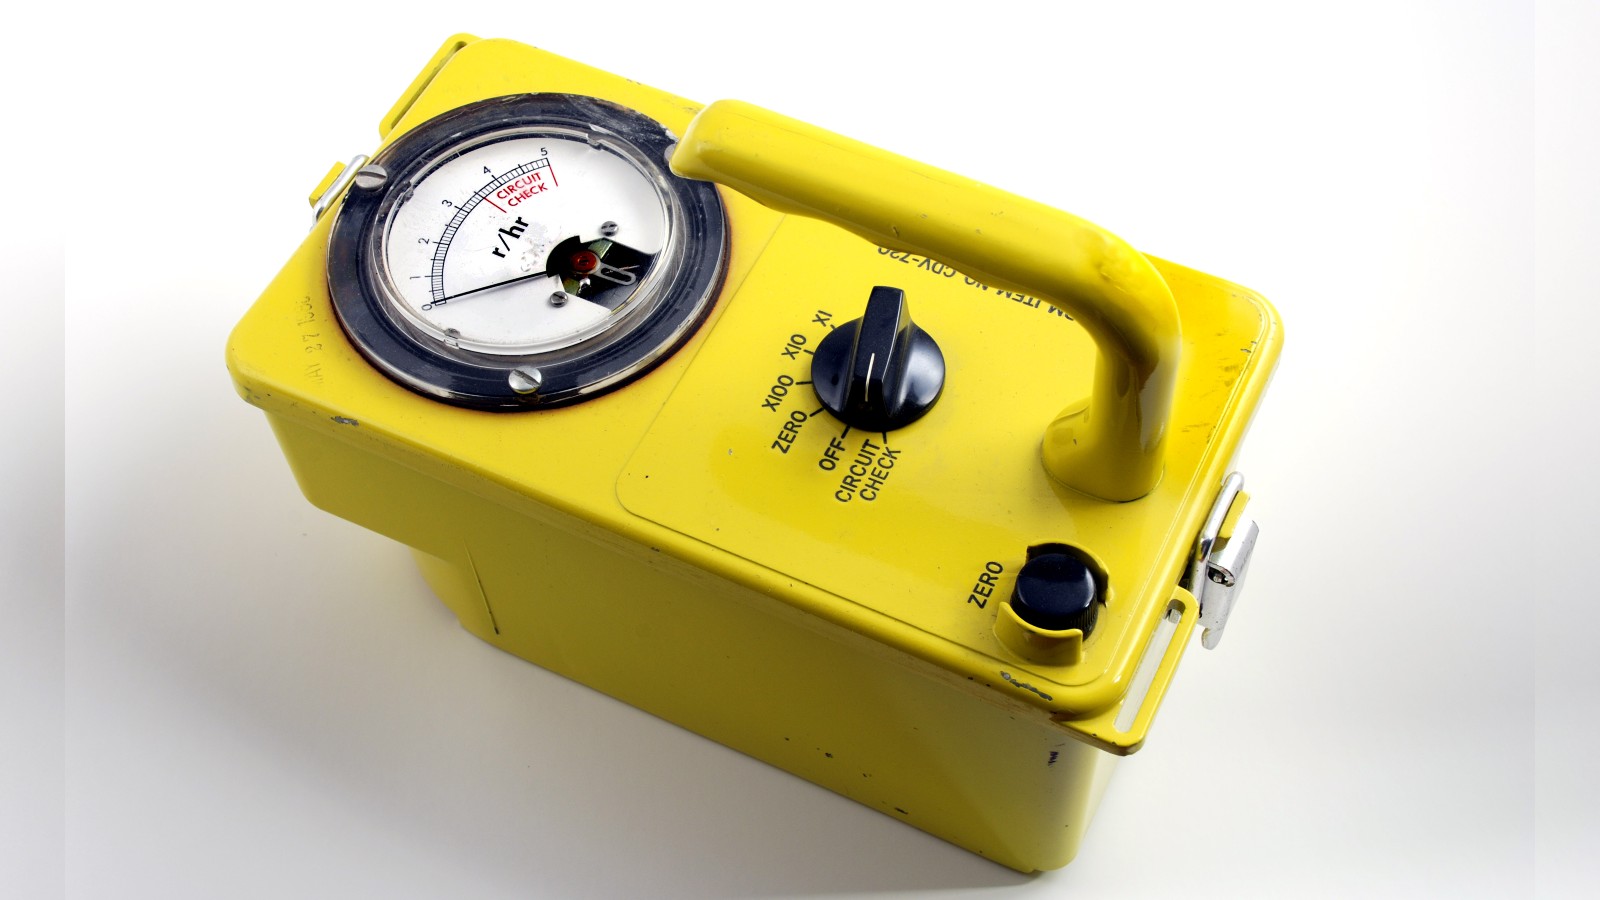 Geiger counter: How they detect and measure radiation | Live Science